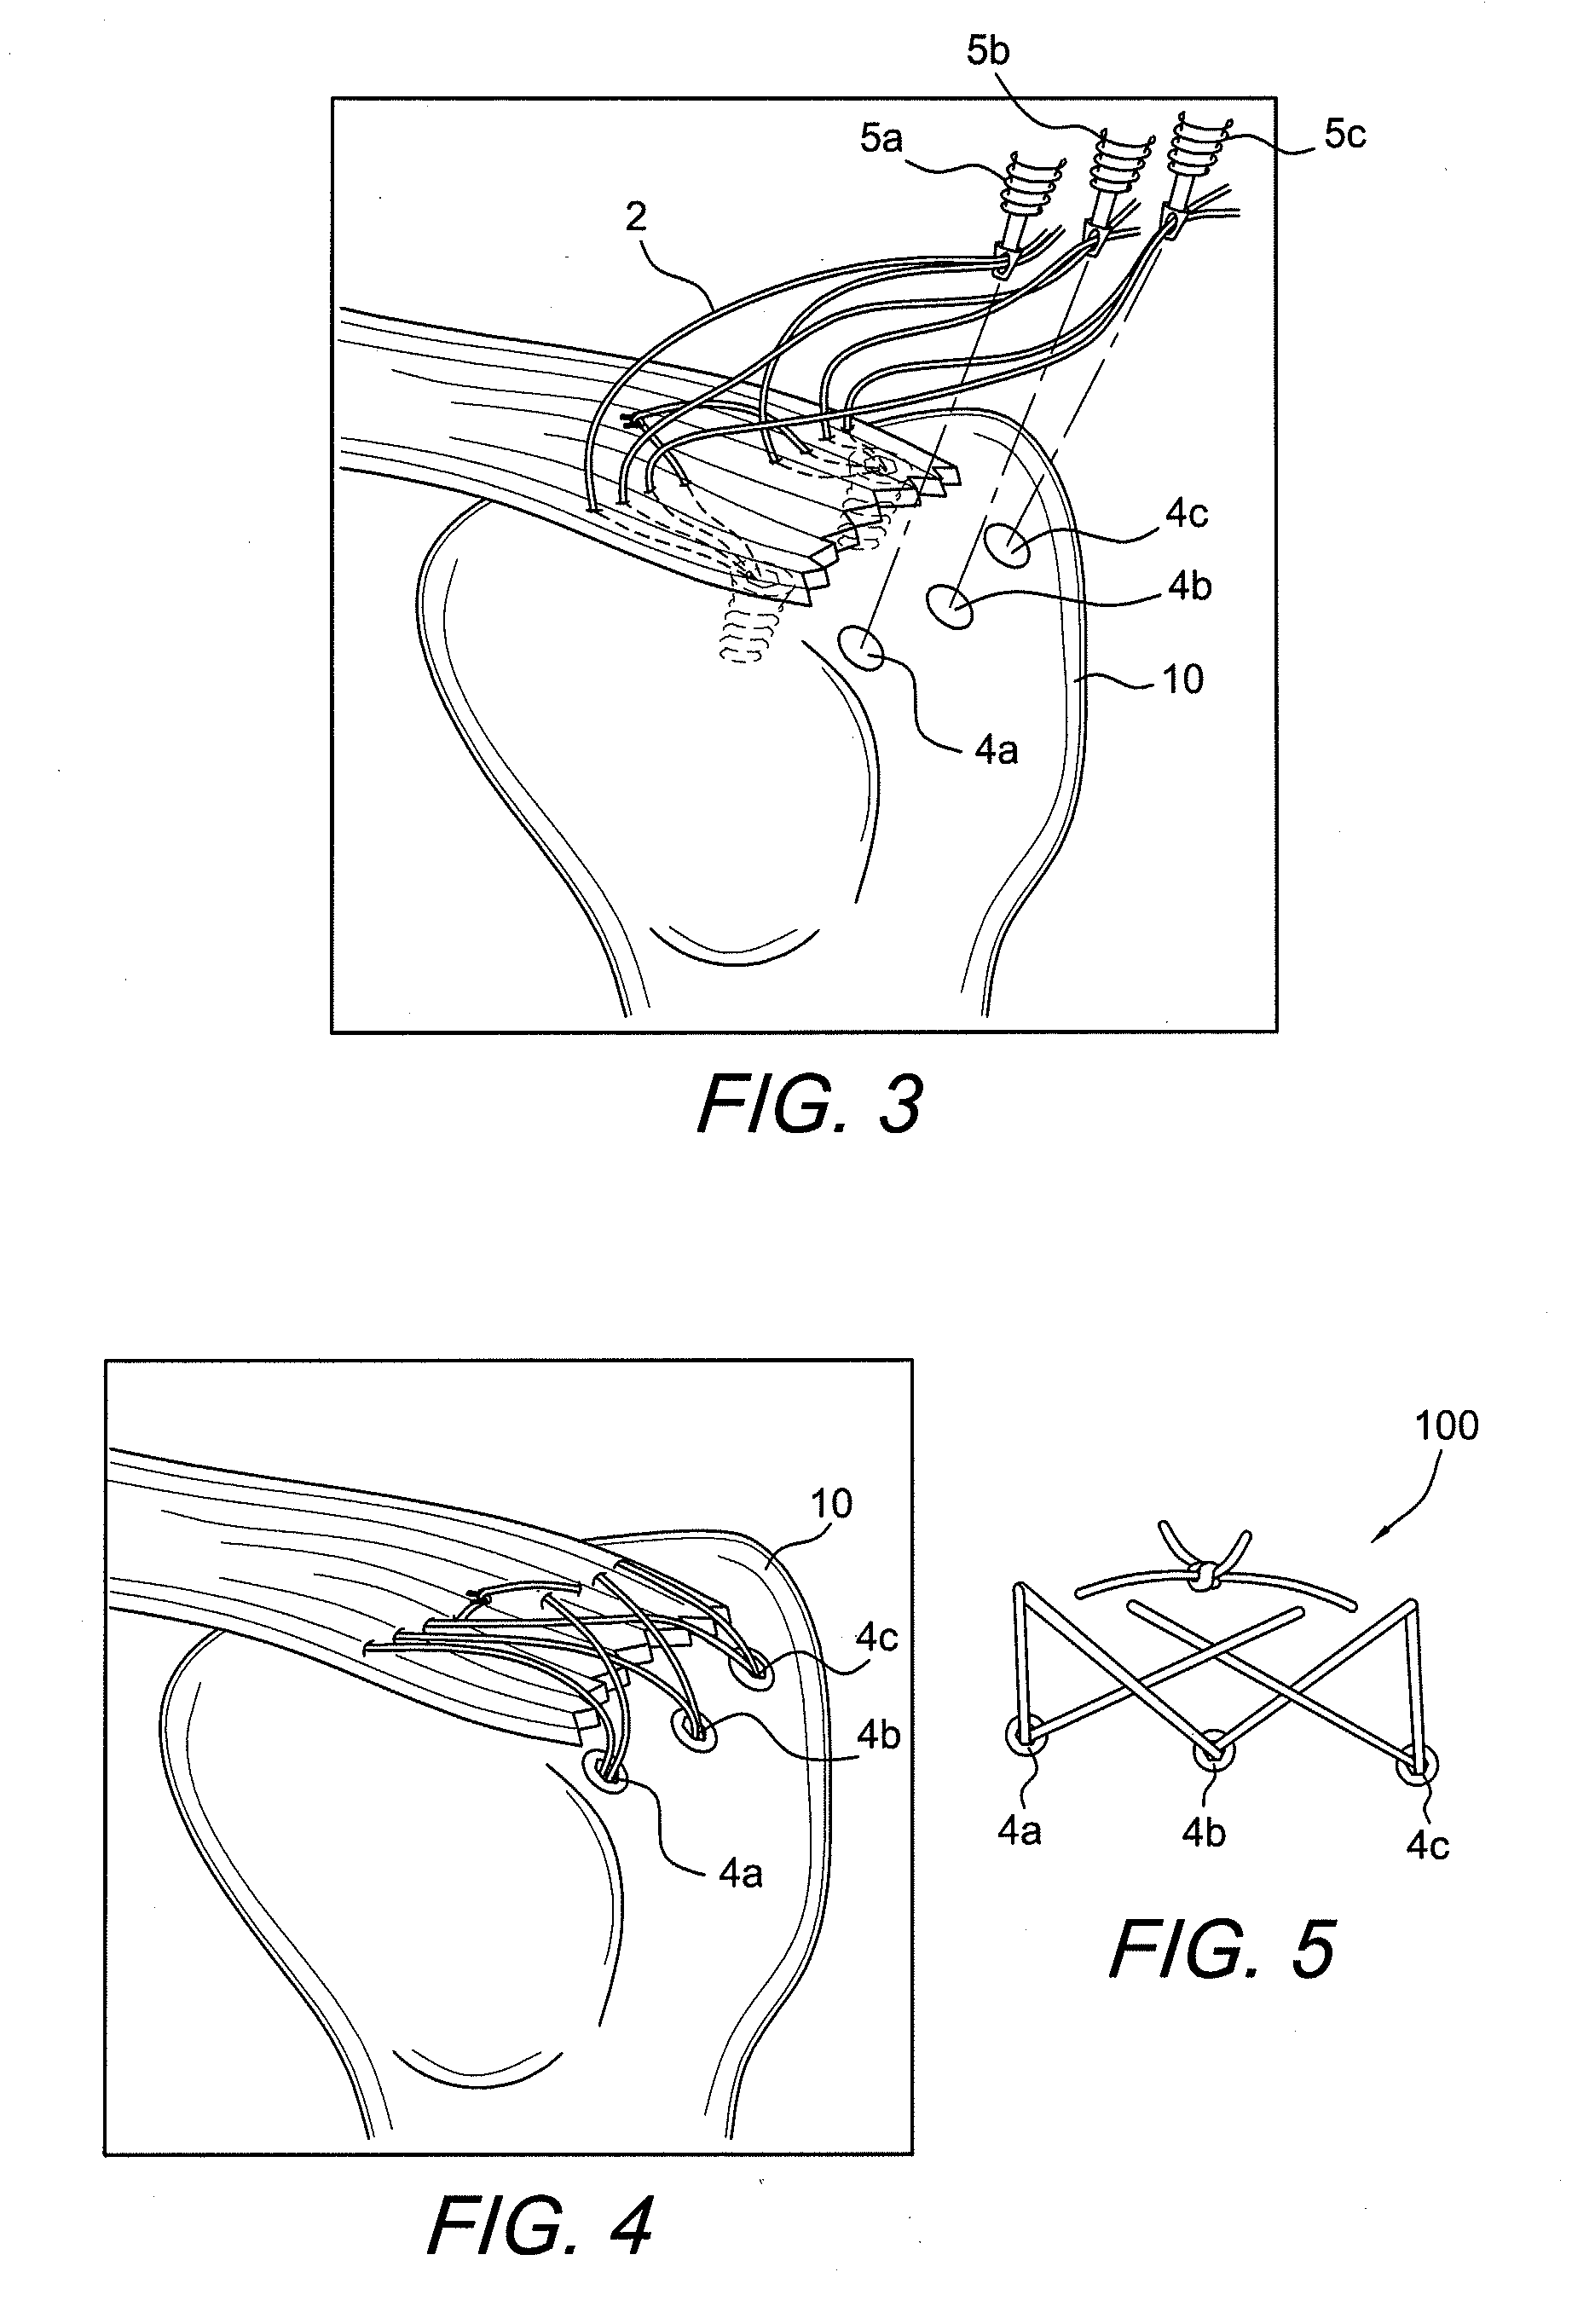 Method of knotless tissue fixation with criss-cross suture pattern